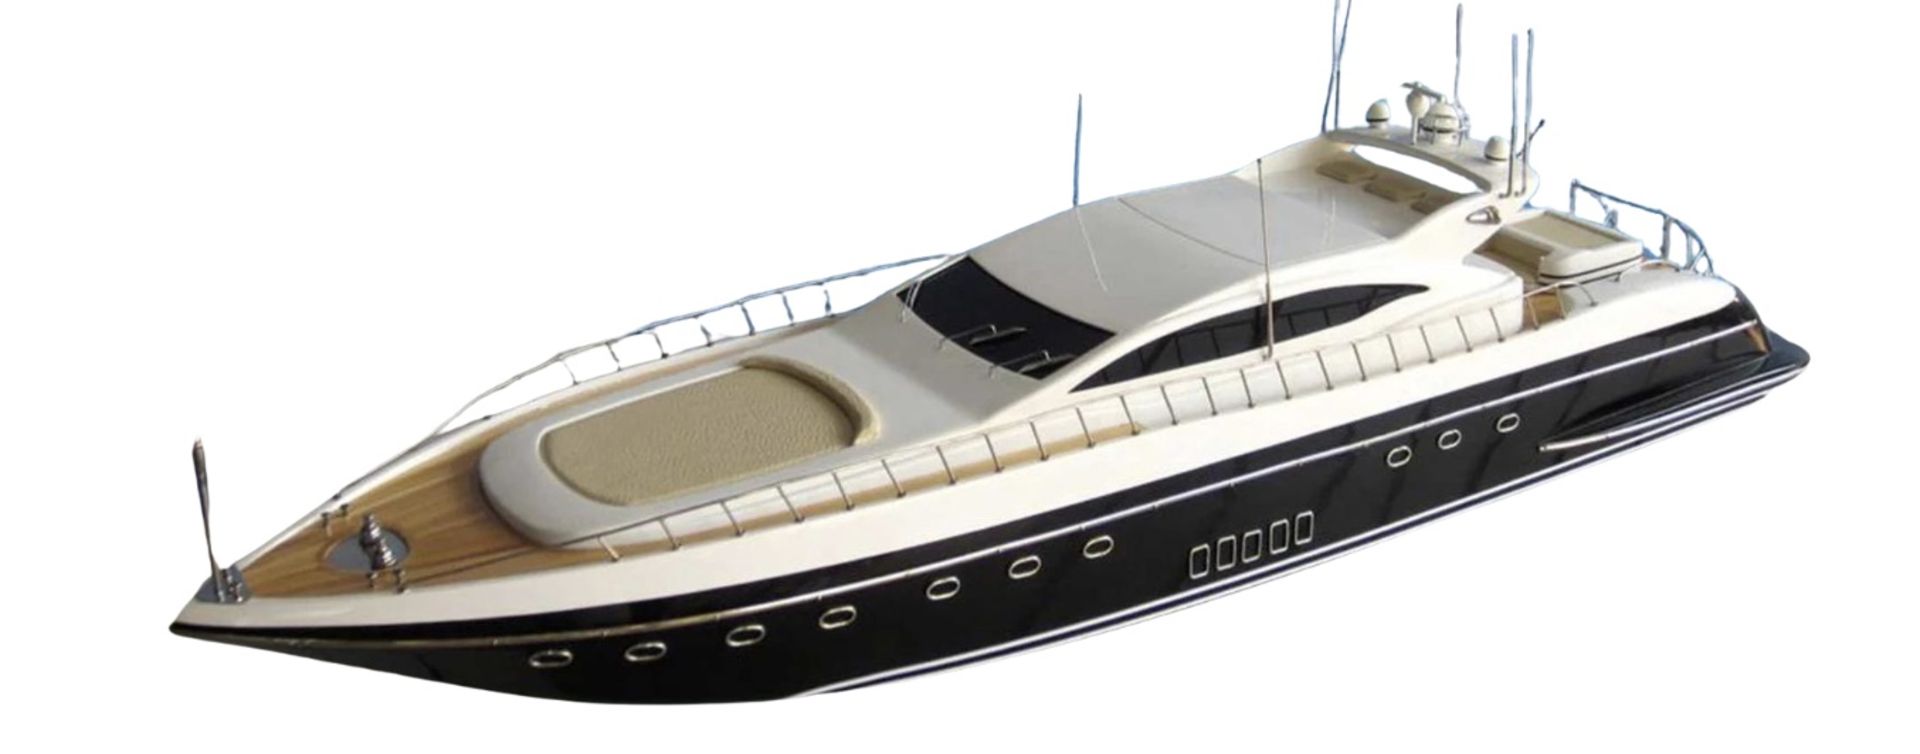 Mangusta Yacht Wooden Scale Desk Display Model - Image 2 of 8